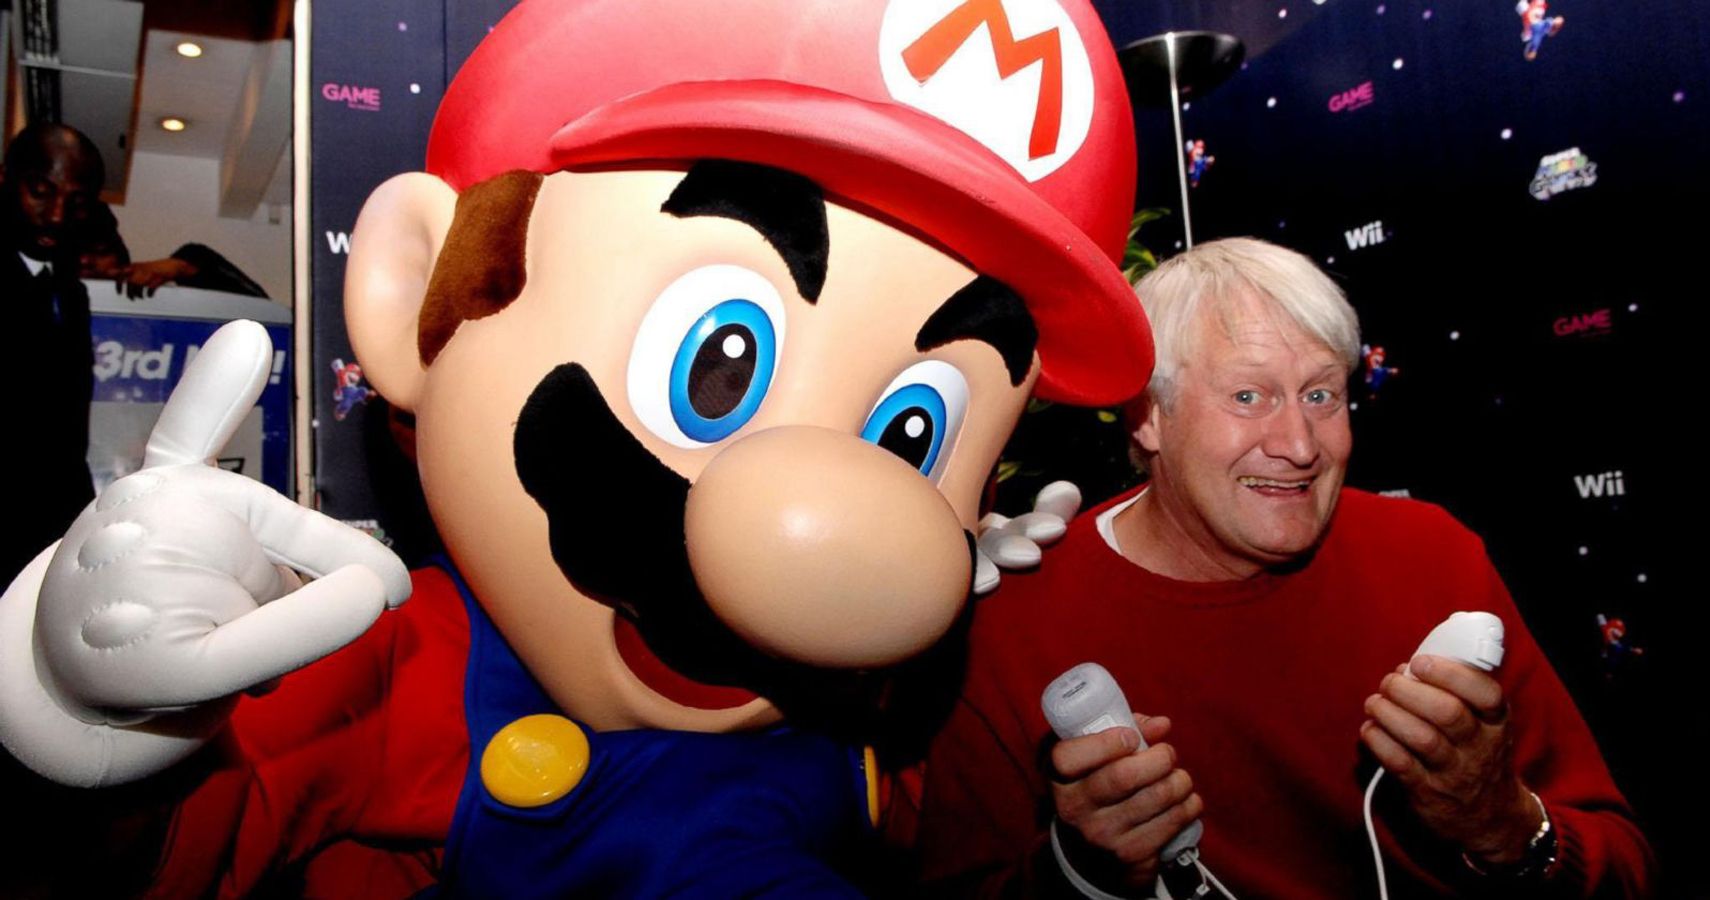 Charles Martinet is the voice actor of Mario from Super Mario Bros